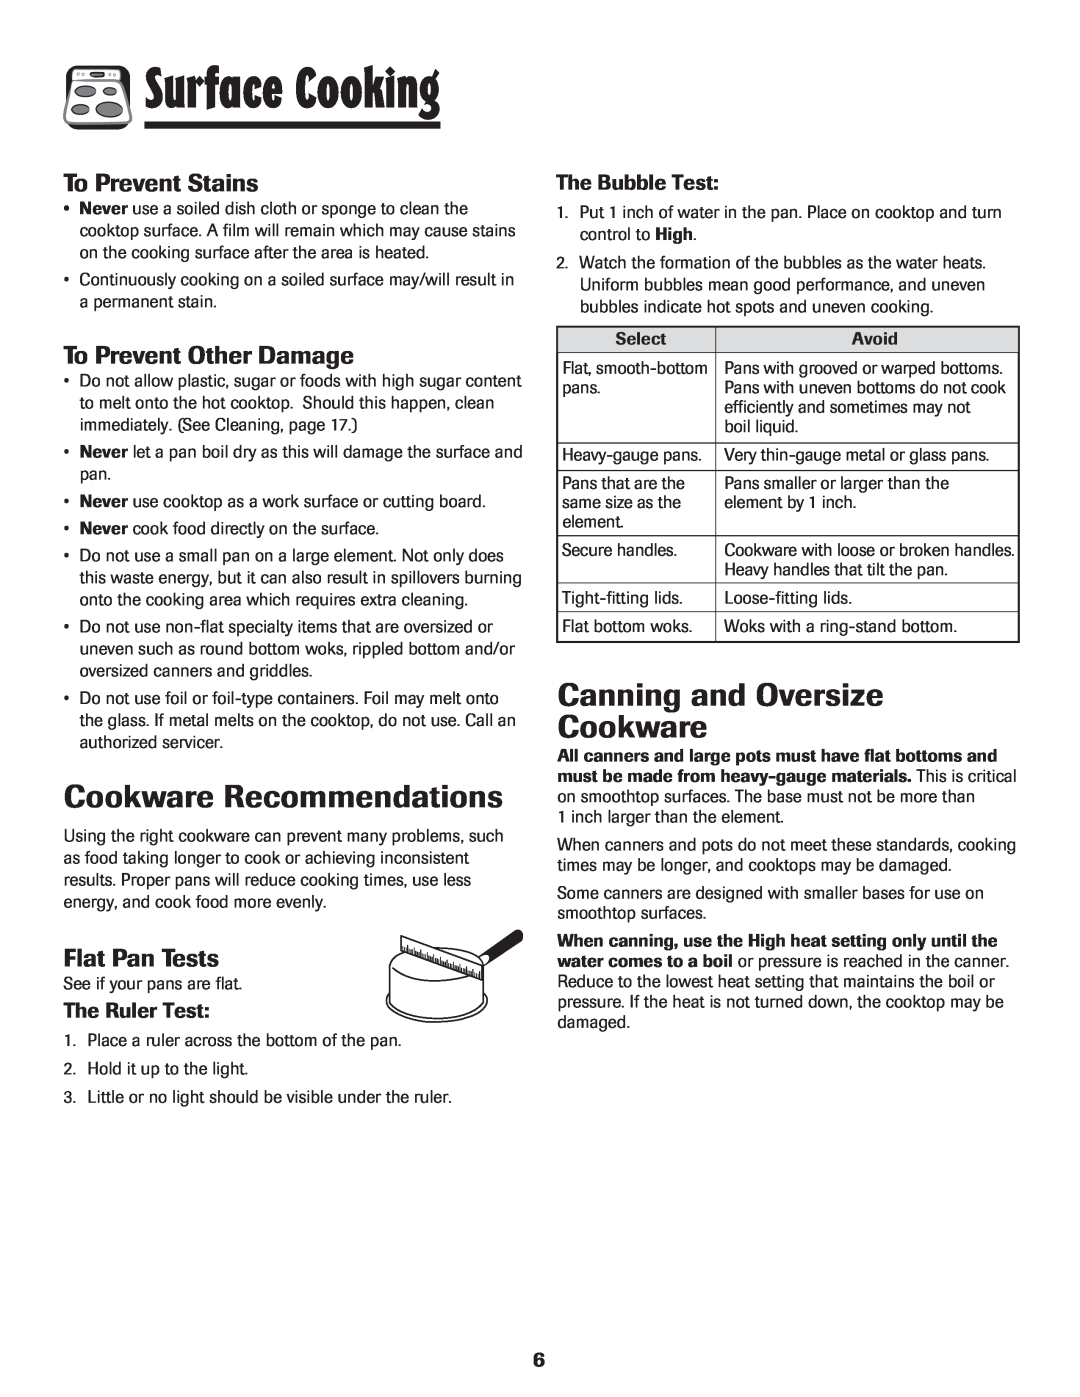 Maytag MES5752BAW Cookware Recommendations, Canning and Oversize Cookware, To Prevent Stains, To Prevent Other Damage 